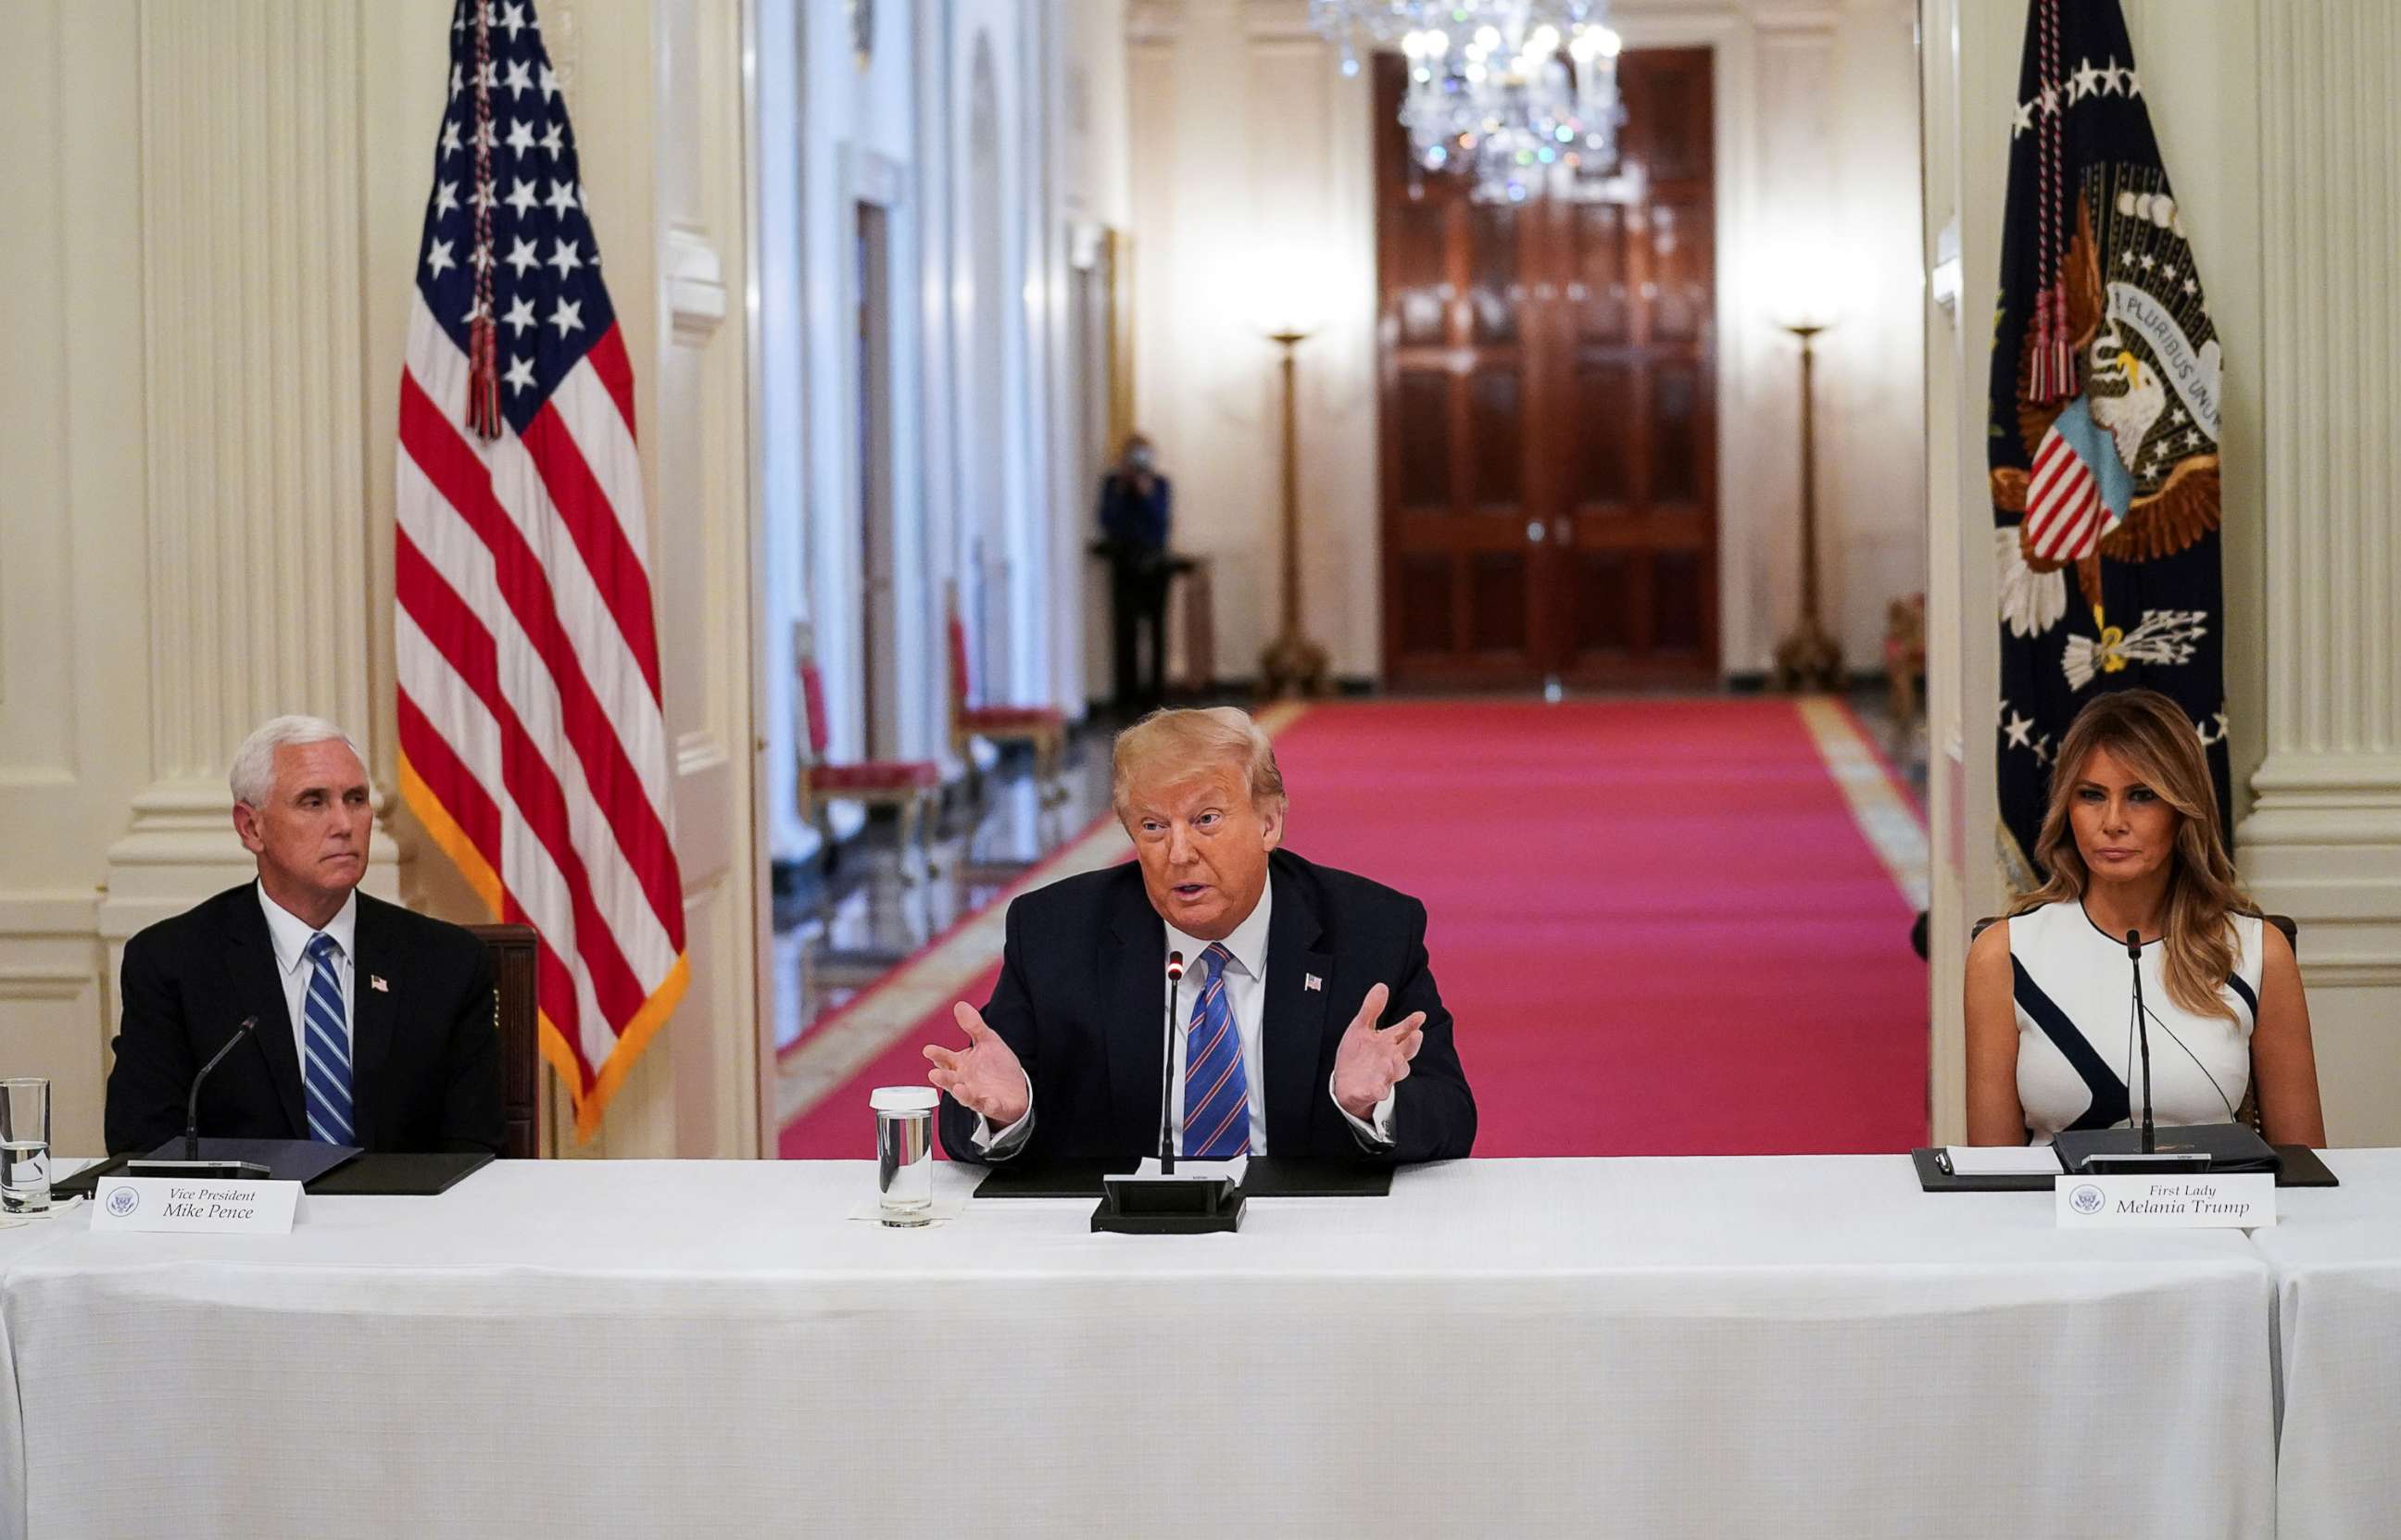 PHOTO: President Donald Trump is flanked by Vice President Mike Pence and first lady Melania Trump as he speaks during an event on reopening schools amid the coronavirus pandemic in the East Room at the White House in Washington, July 7, 2020.